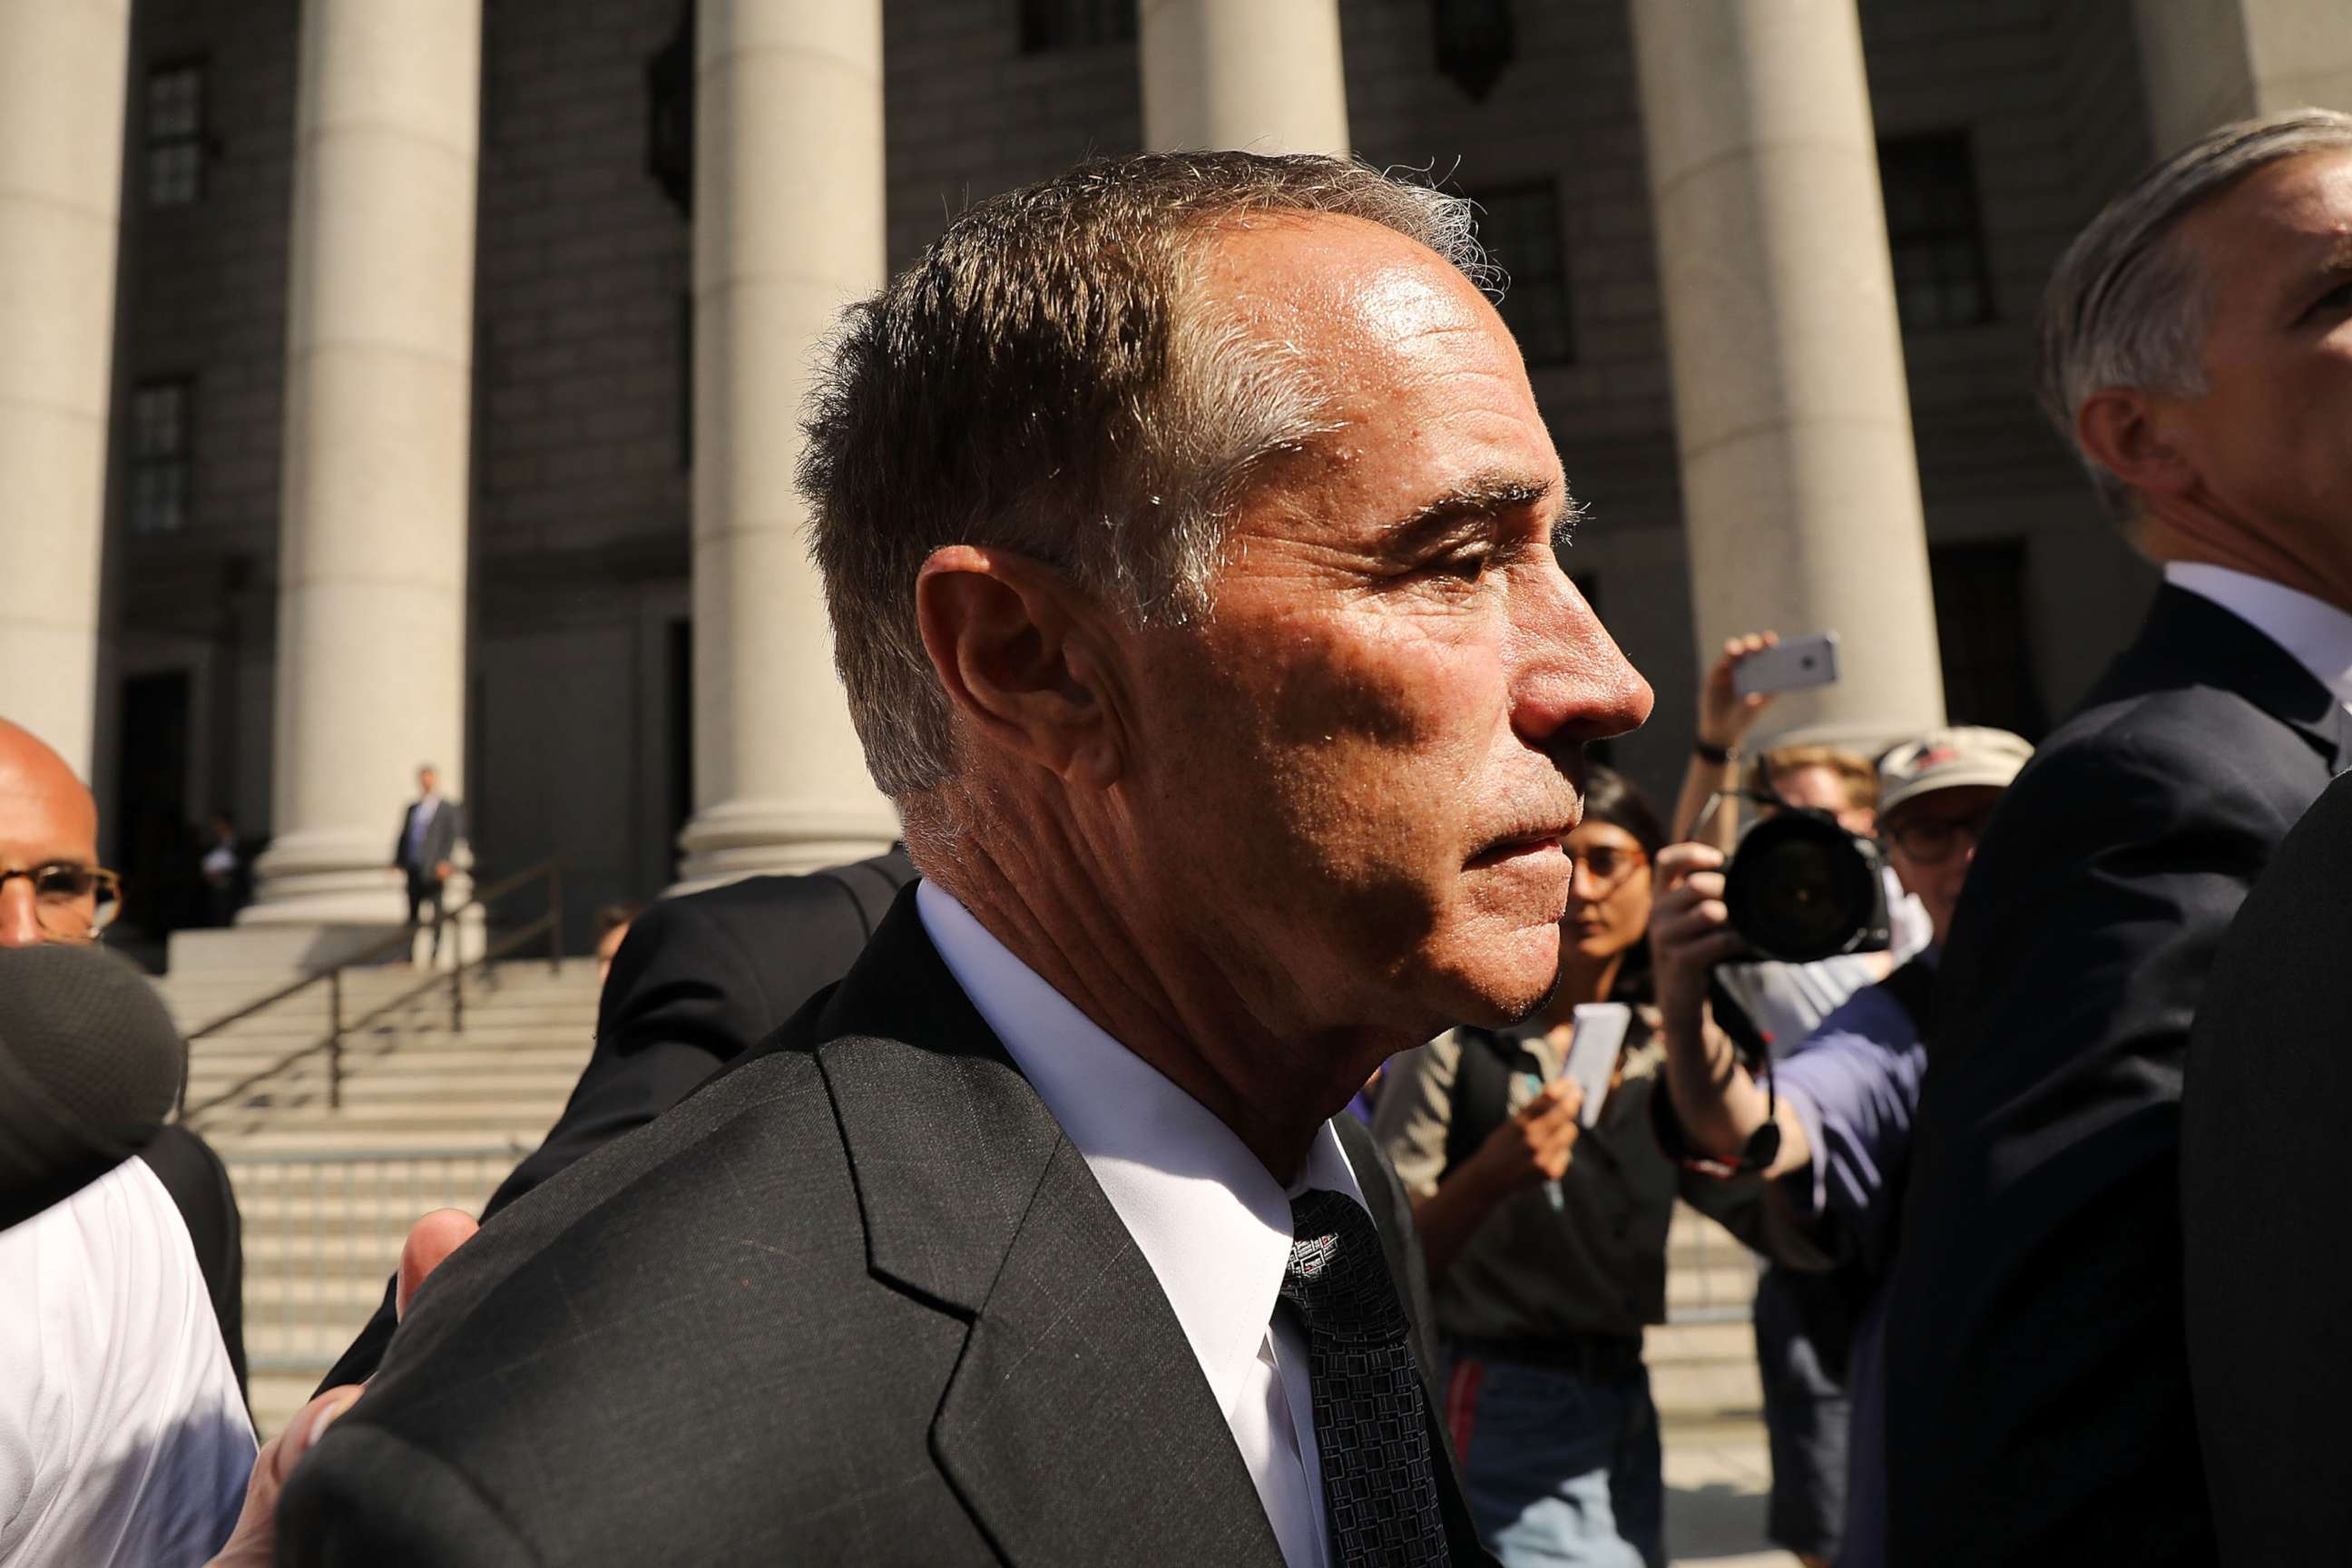 PHOTO: Rep. Chris Collins walks out of a New York court house after being charged with insider trading on Aug. 8, 2018 in New York City.